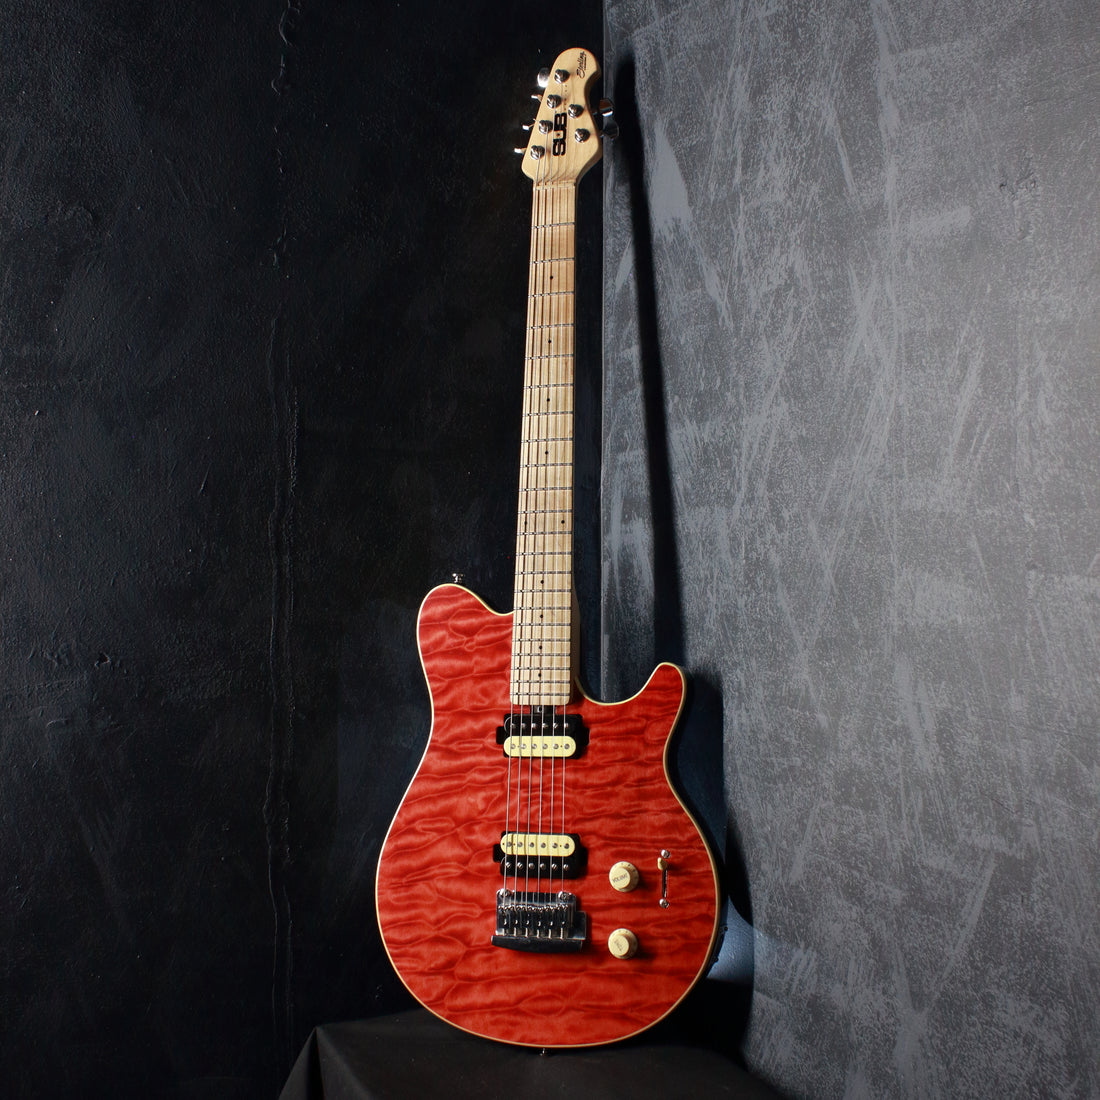 Sterling by Musicman SUB AX3 Translucent Red 2013